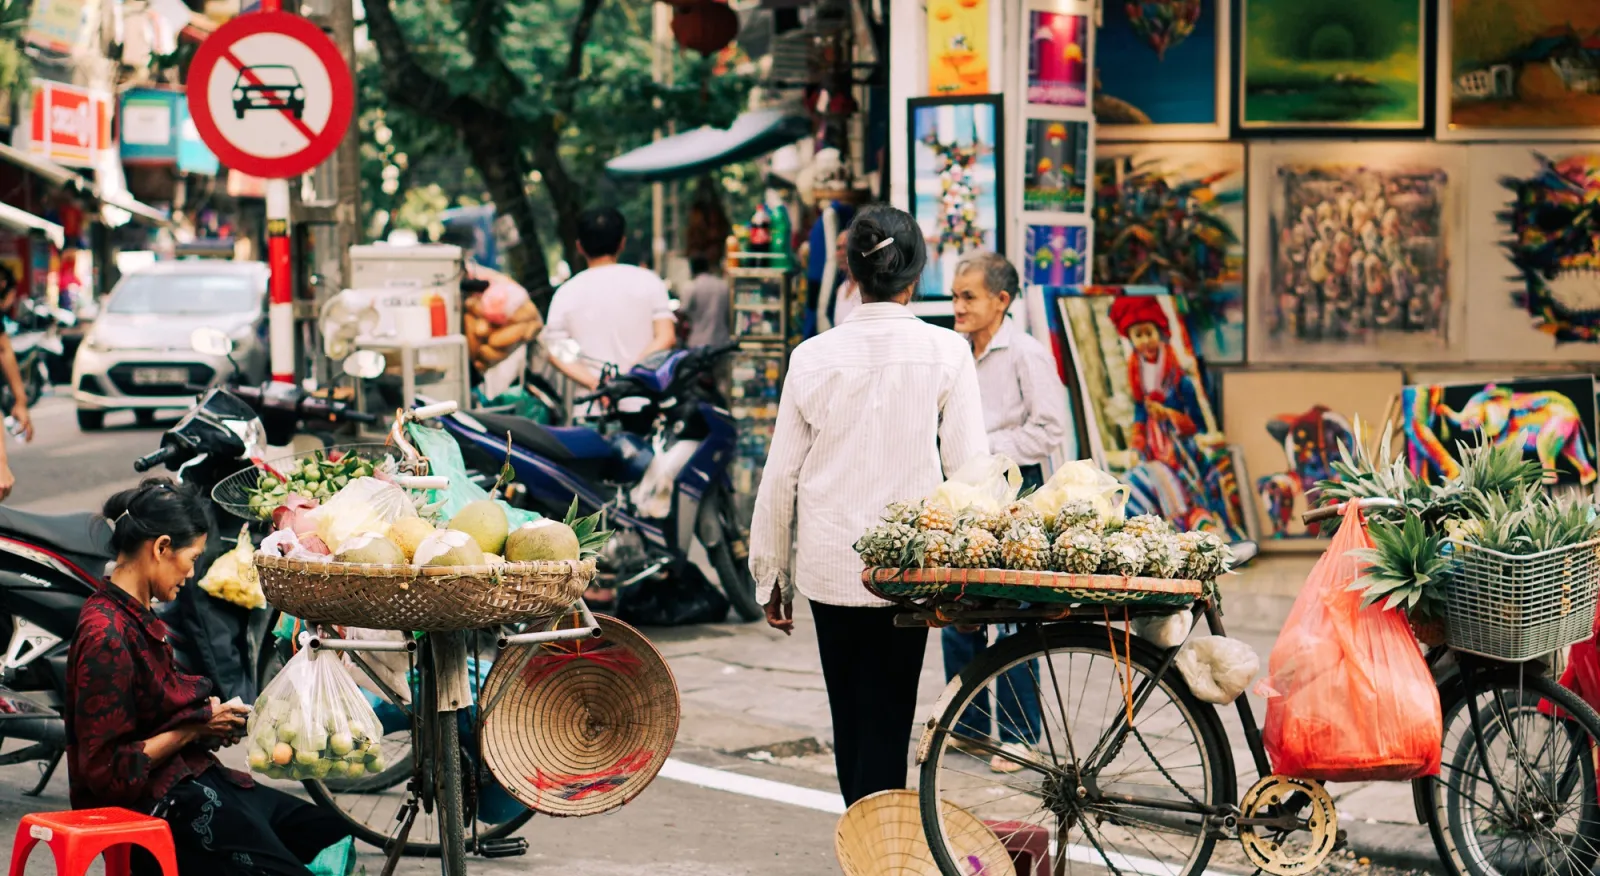 A woman walks across the street, away from the camera. She has a stack of fruit balanced on a wheeled cart. Another woman sits on the ground, selling food from her bicycle.